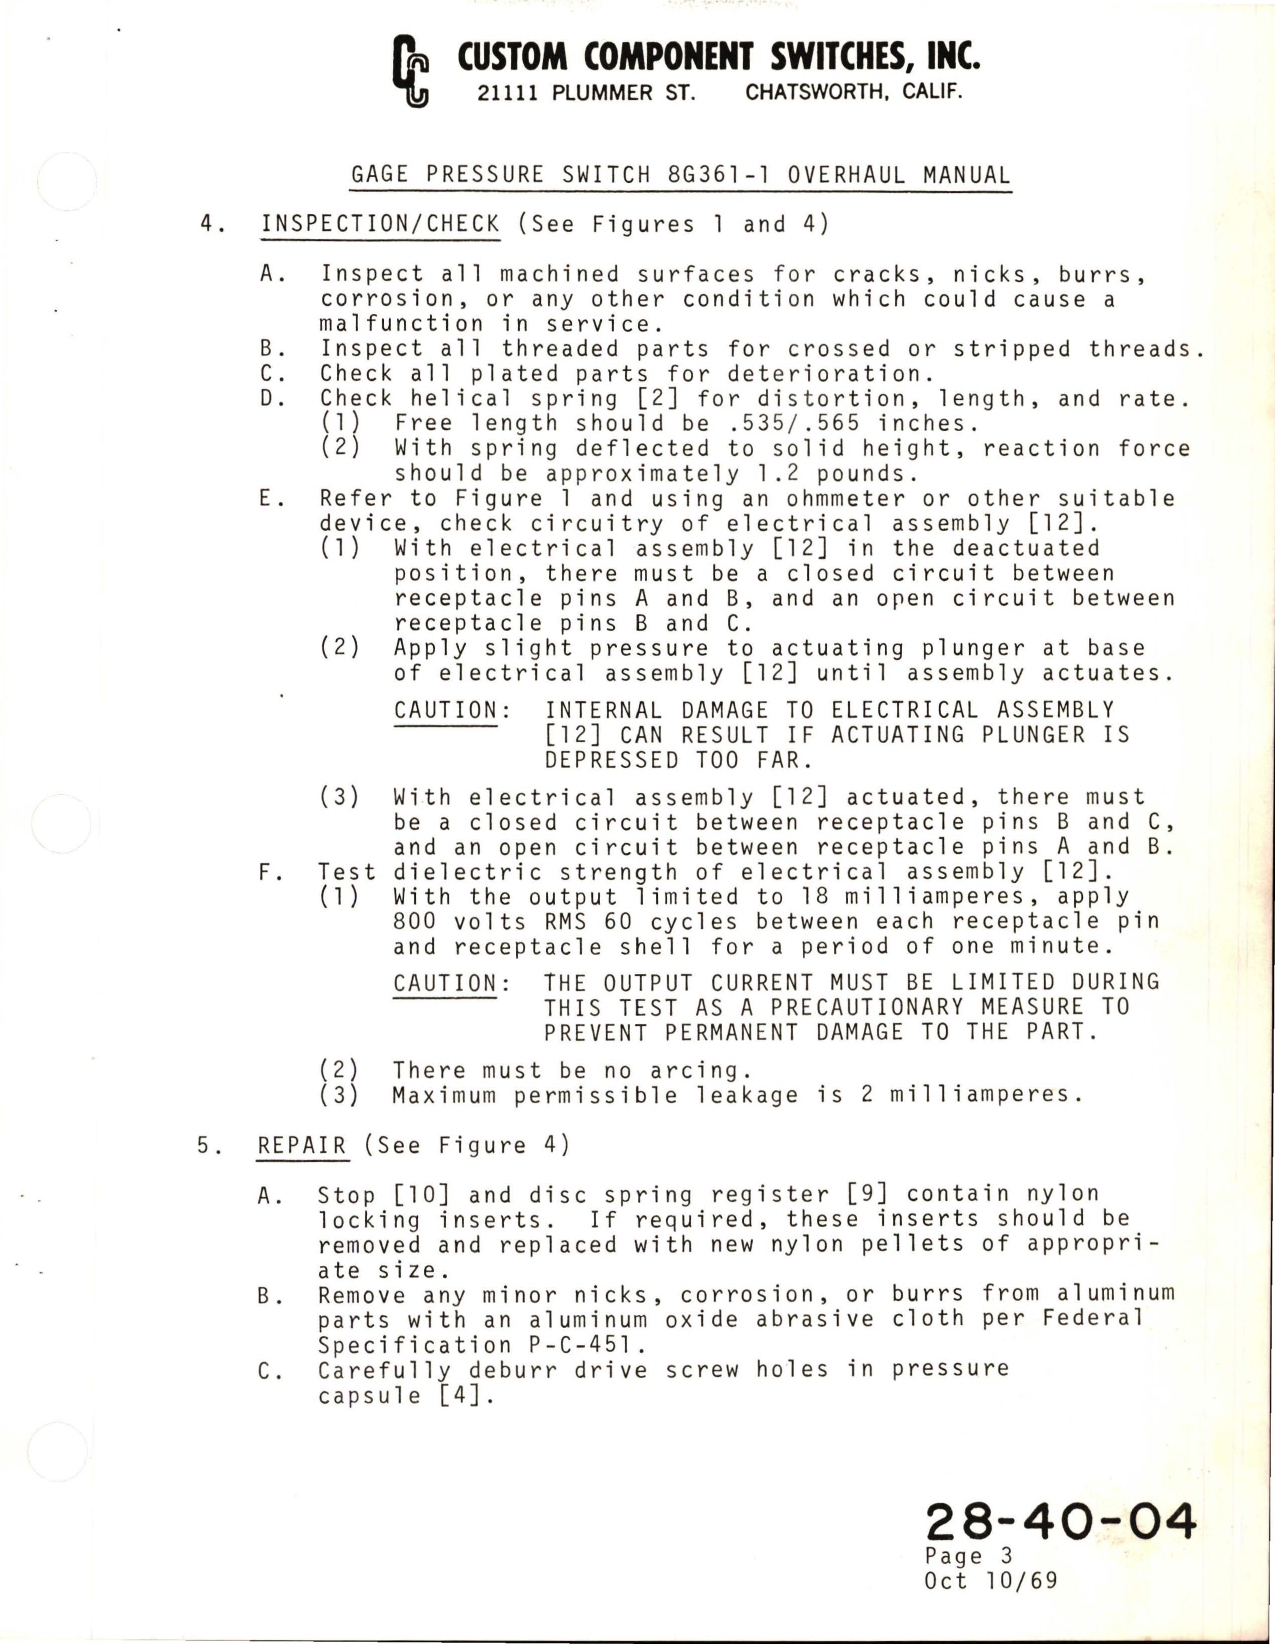 Sample page 5 from AirCorps Library document: Overhaul Manual for Gage Pressure Switch - 8G361-1